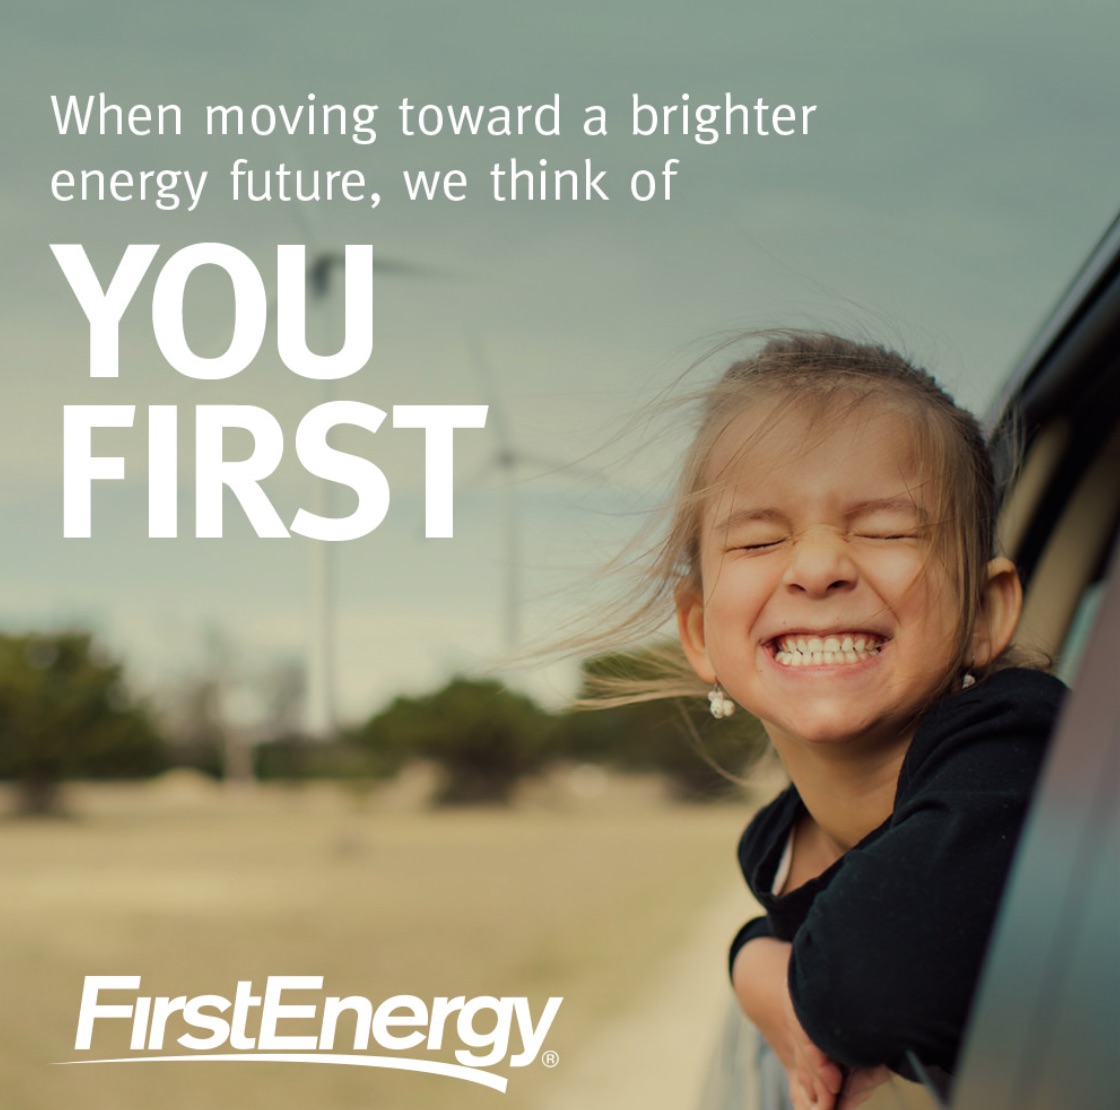 pa-environment-digest-blog-firstenergy-launches-you-first-campaign-to